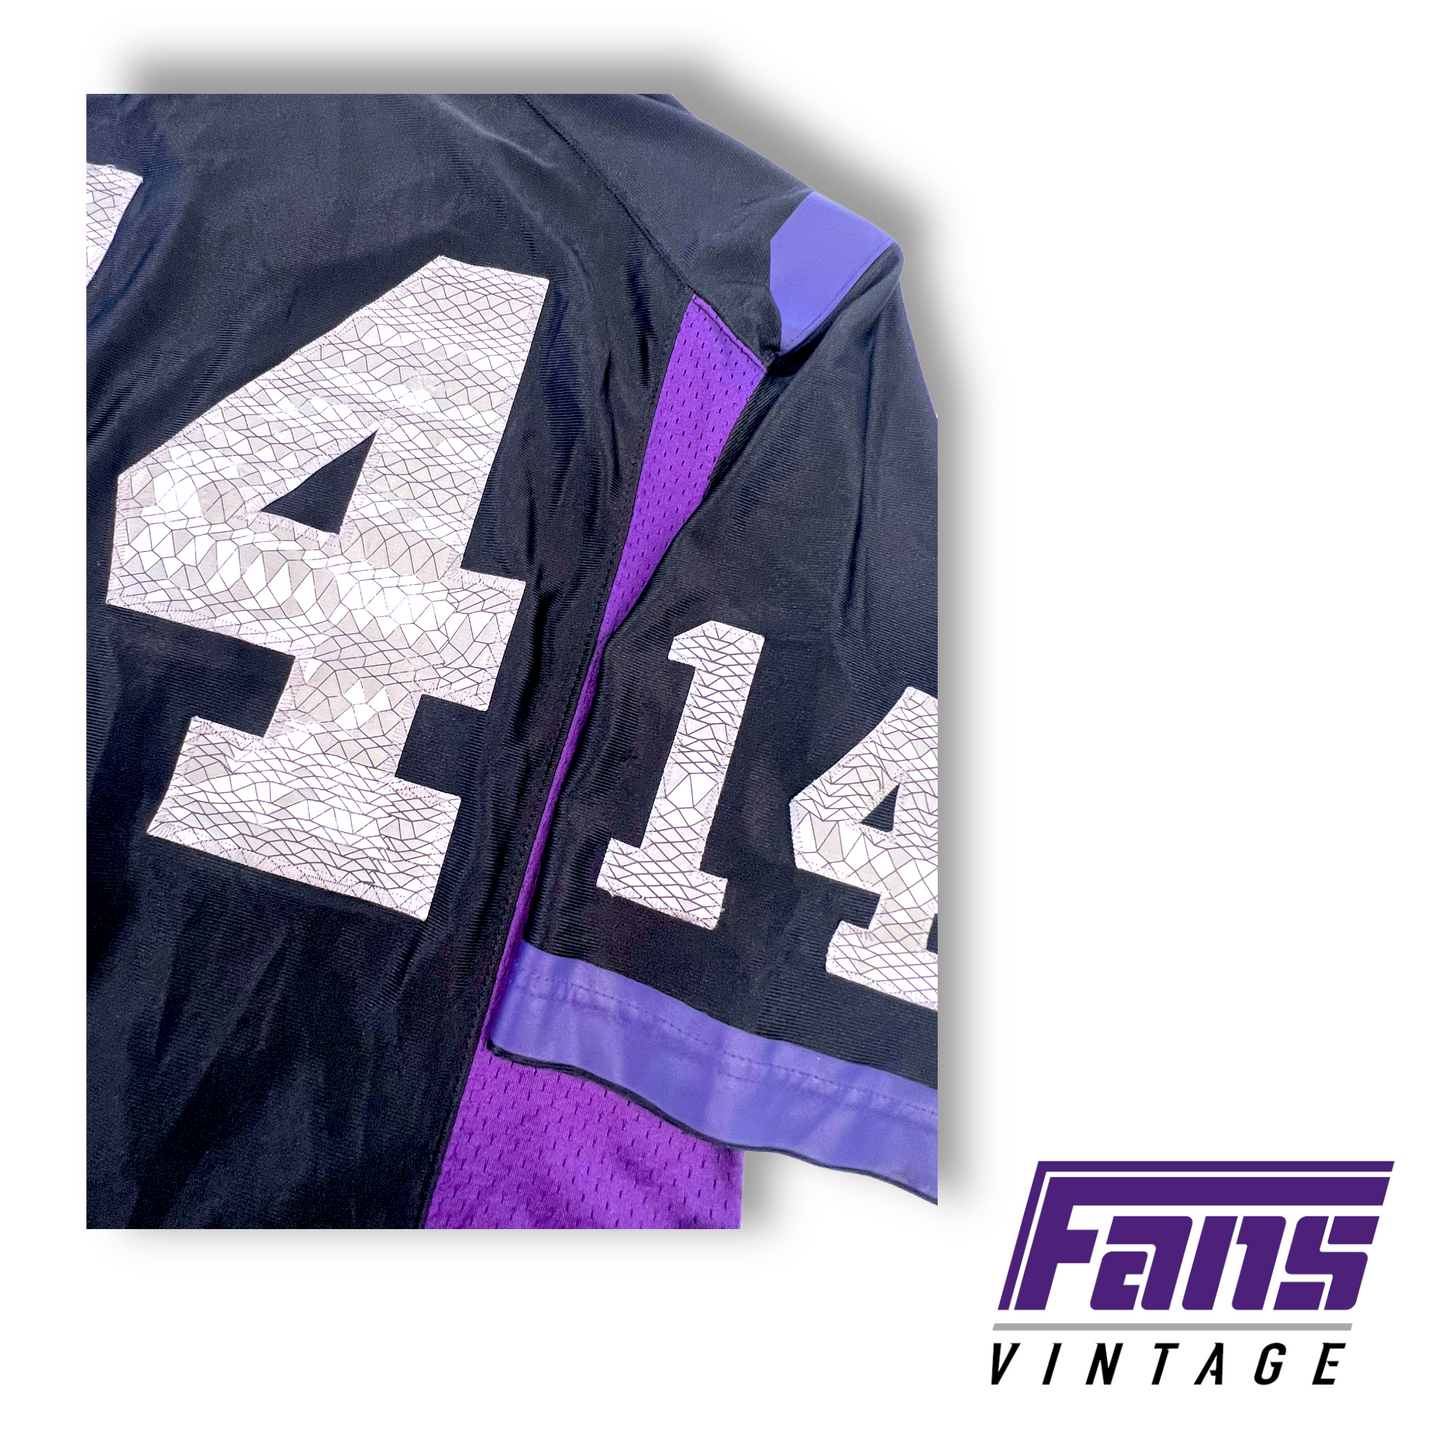 *GRAIL* 2010 Andy Dalton "Til Hell Freezes" Fully Stitched Limited Edition TCU Football Jersey